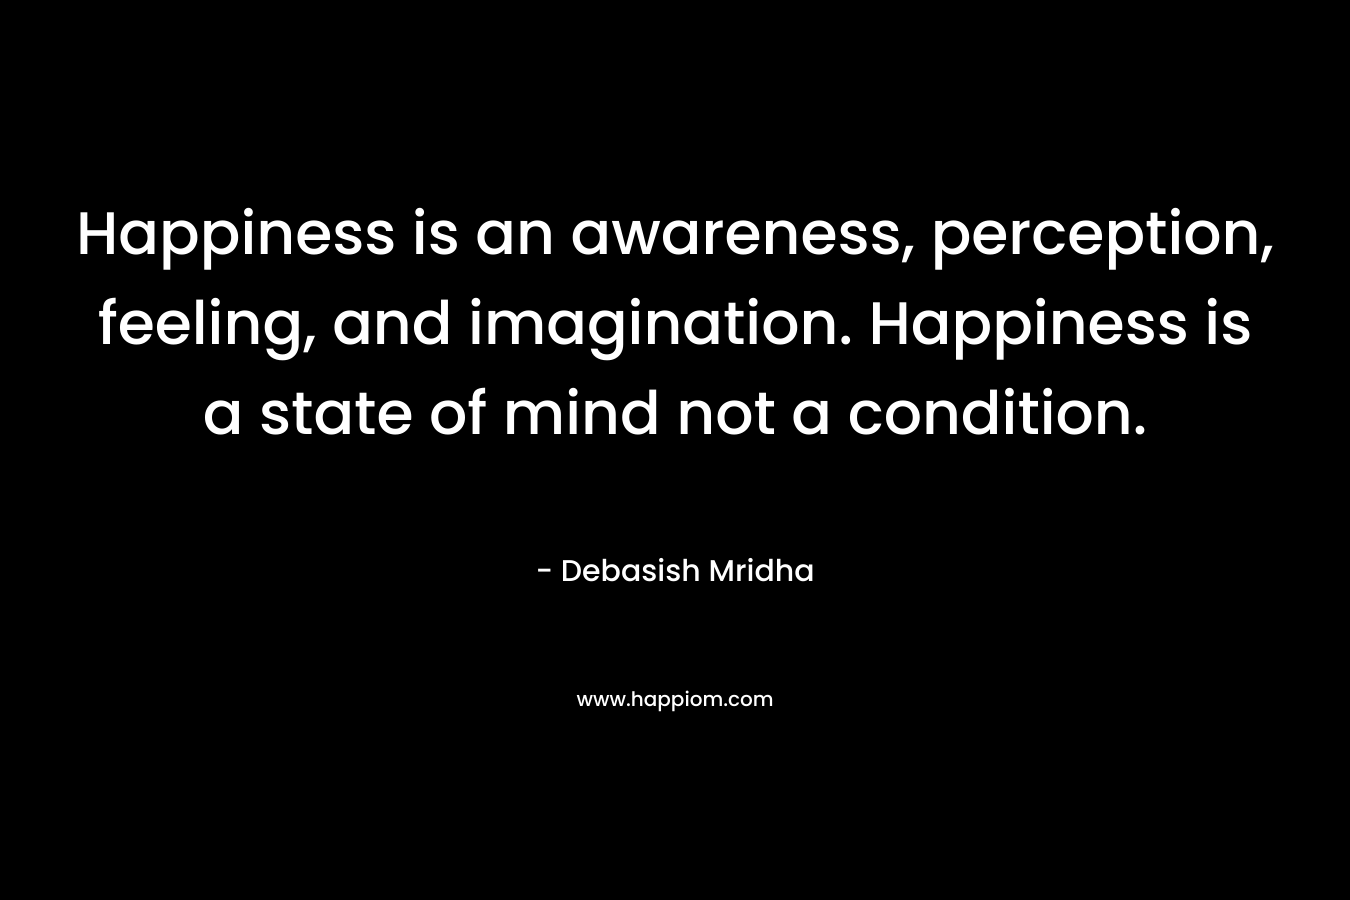 Happiness is an awareness, perception, feeling, and imagination. Happiness is a state of mind not a condition.